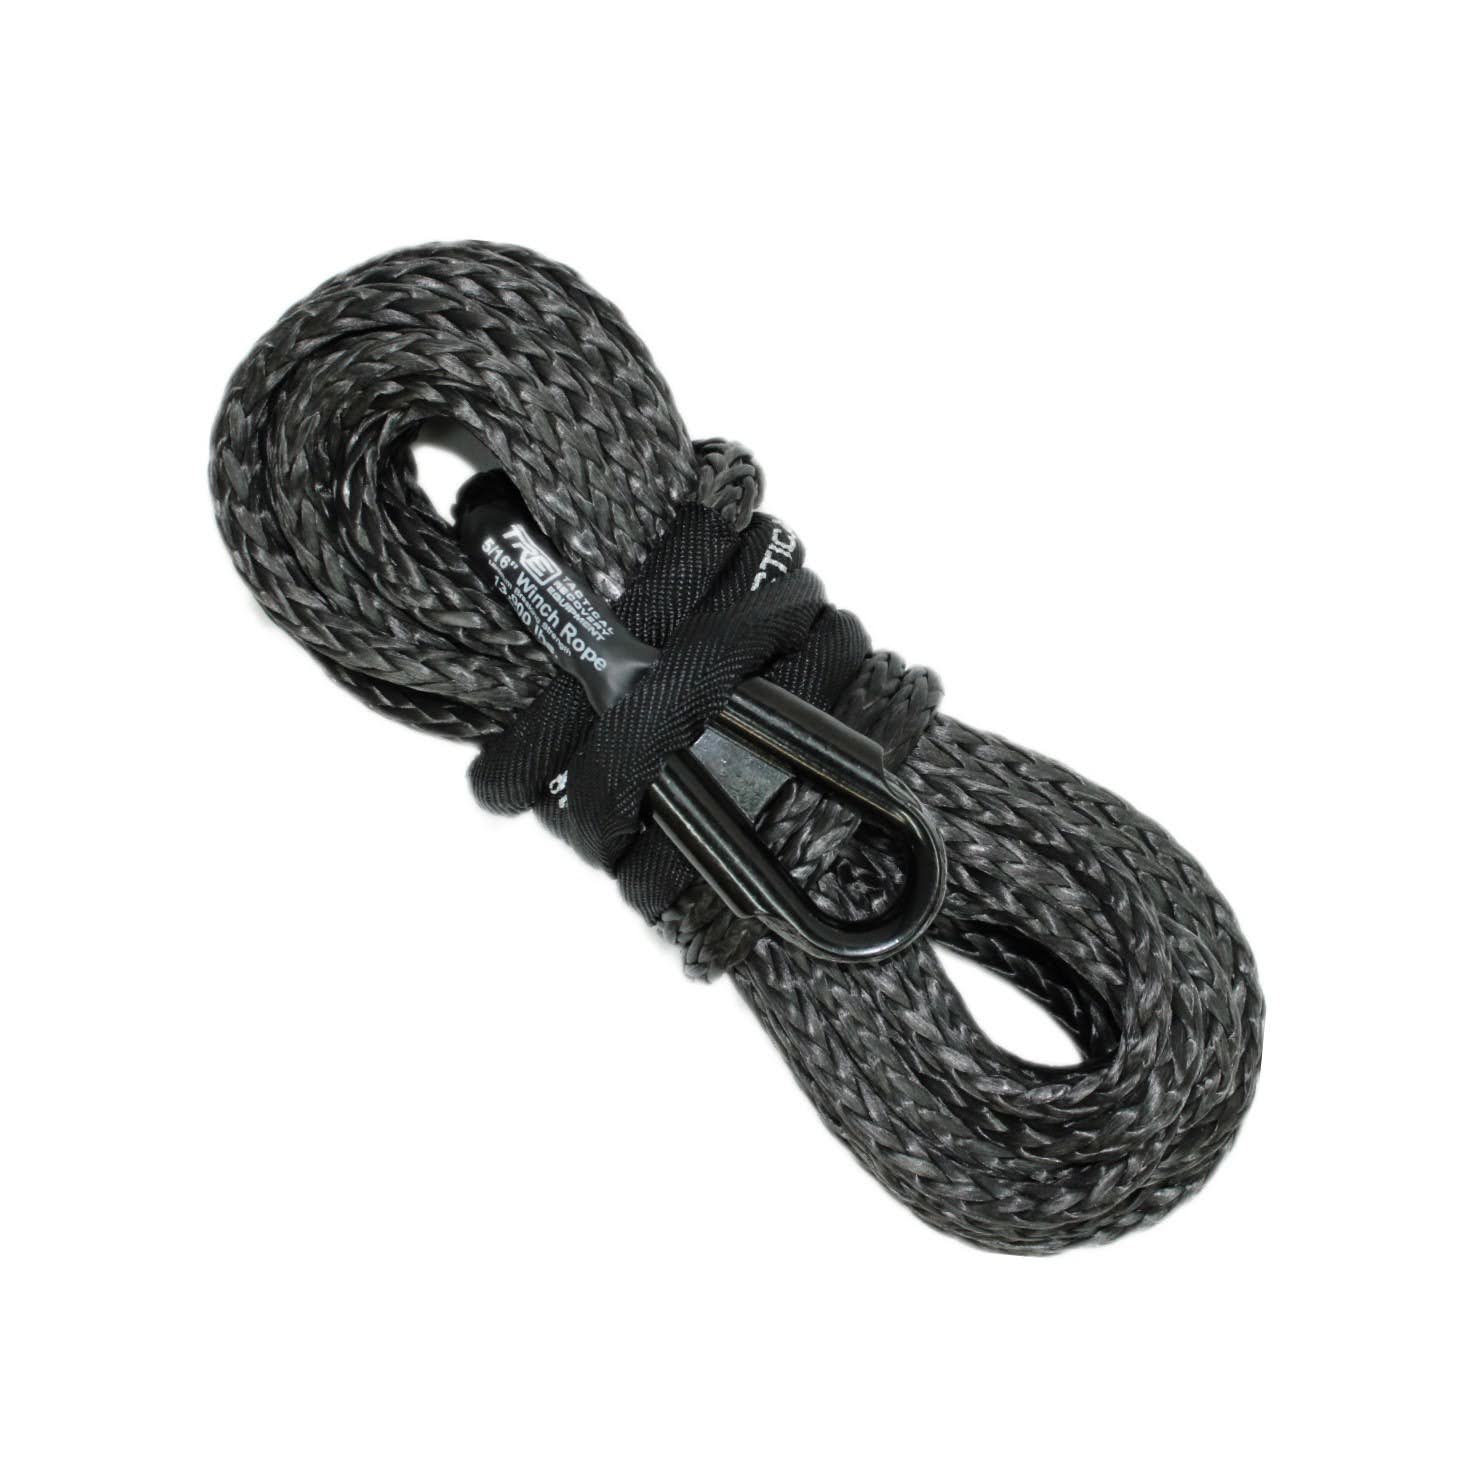 5/16 Synthetic Winch Rope – 13,000 lb. Breaking Strength – Replacement Winch Rope for 5,000 lb. to 9,000 lb. Winches (Winch Rope Color: Black, Winch R